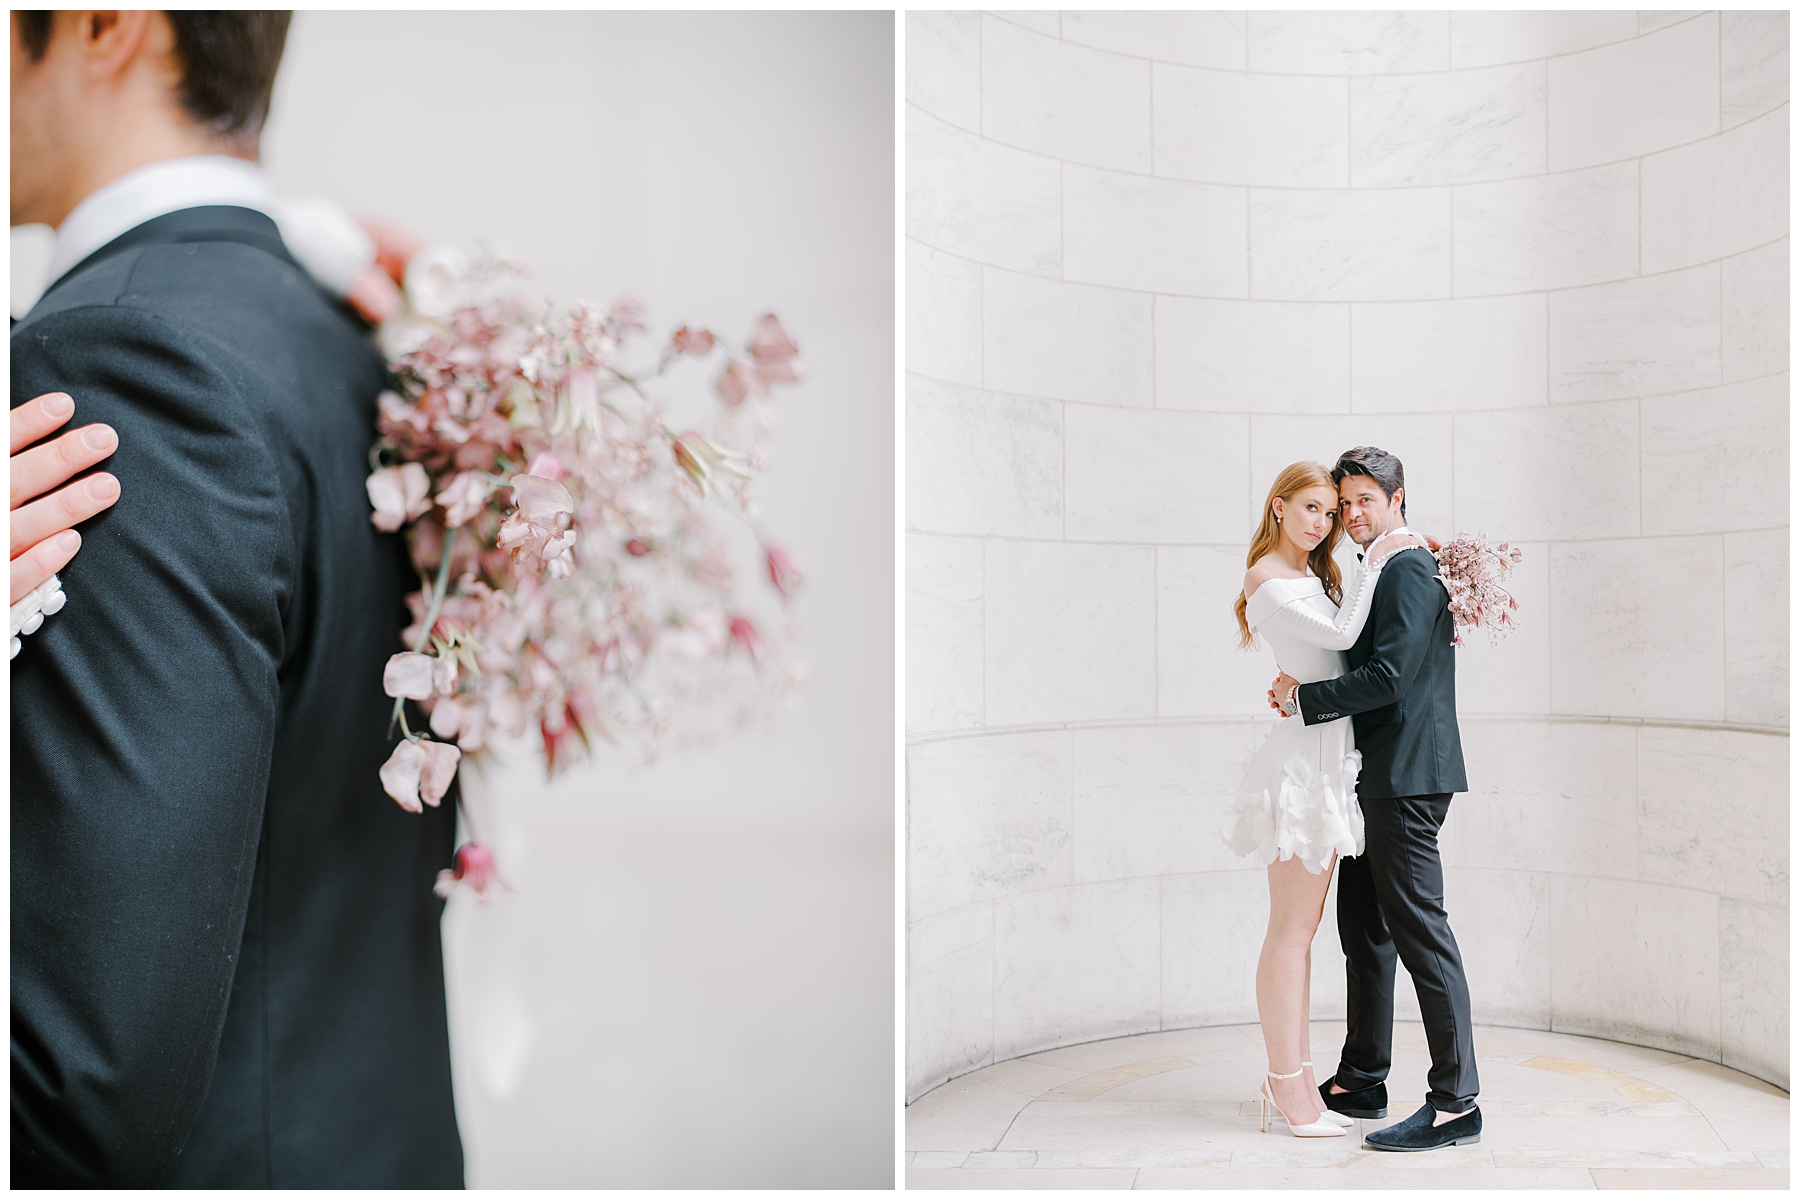 New York Elopement at New York Public Library 